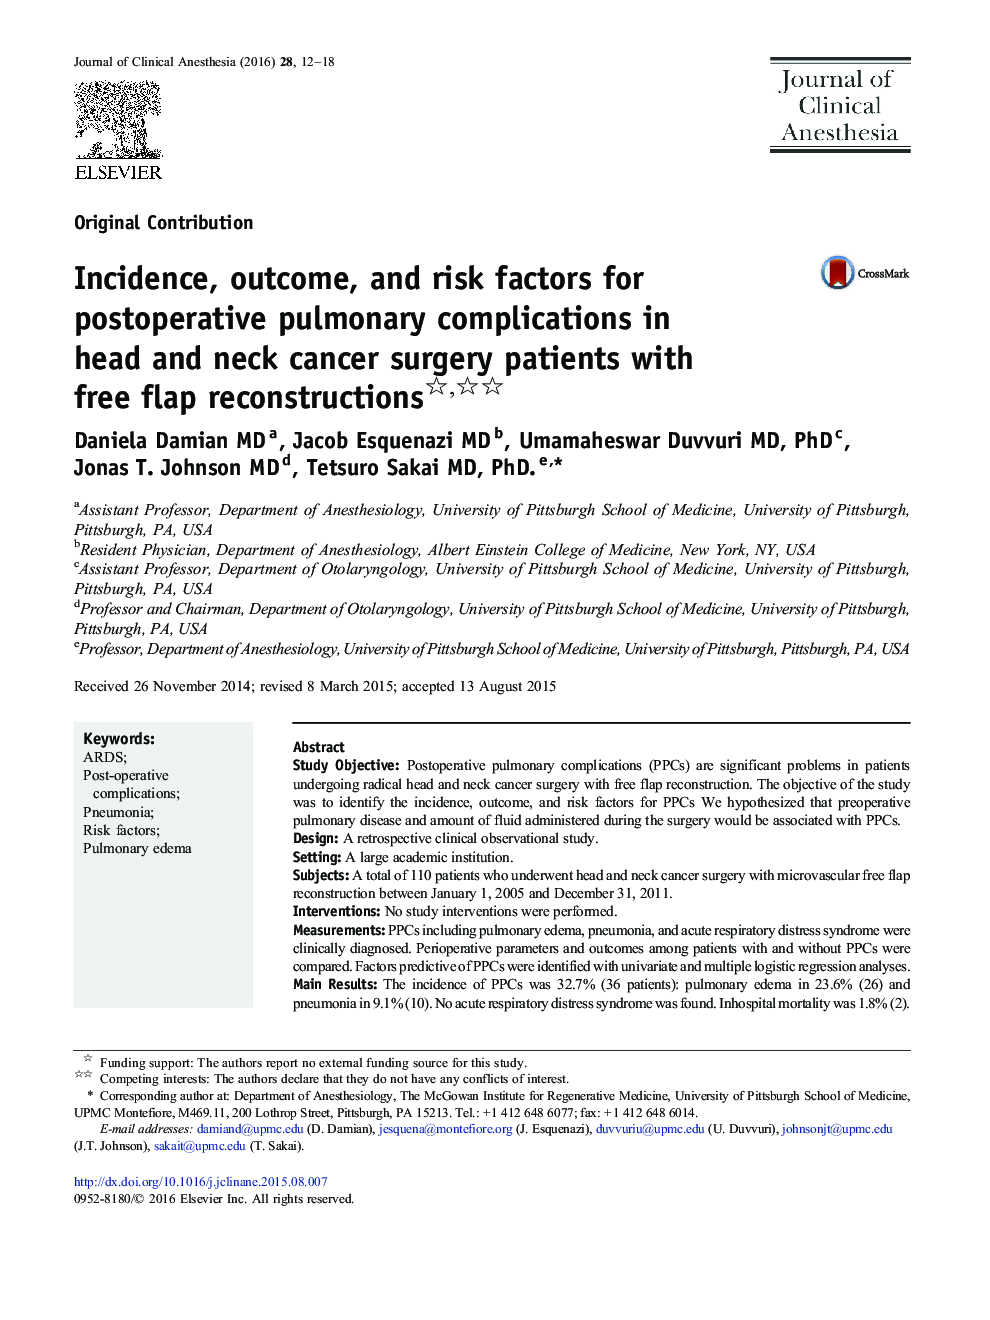 Incidence, outcome, and risk factors for postoperative pulmonary complications in head and neck cancer surgery patients with free flap reconstructions 